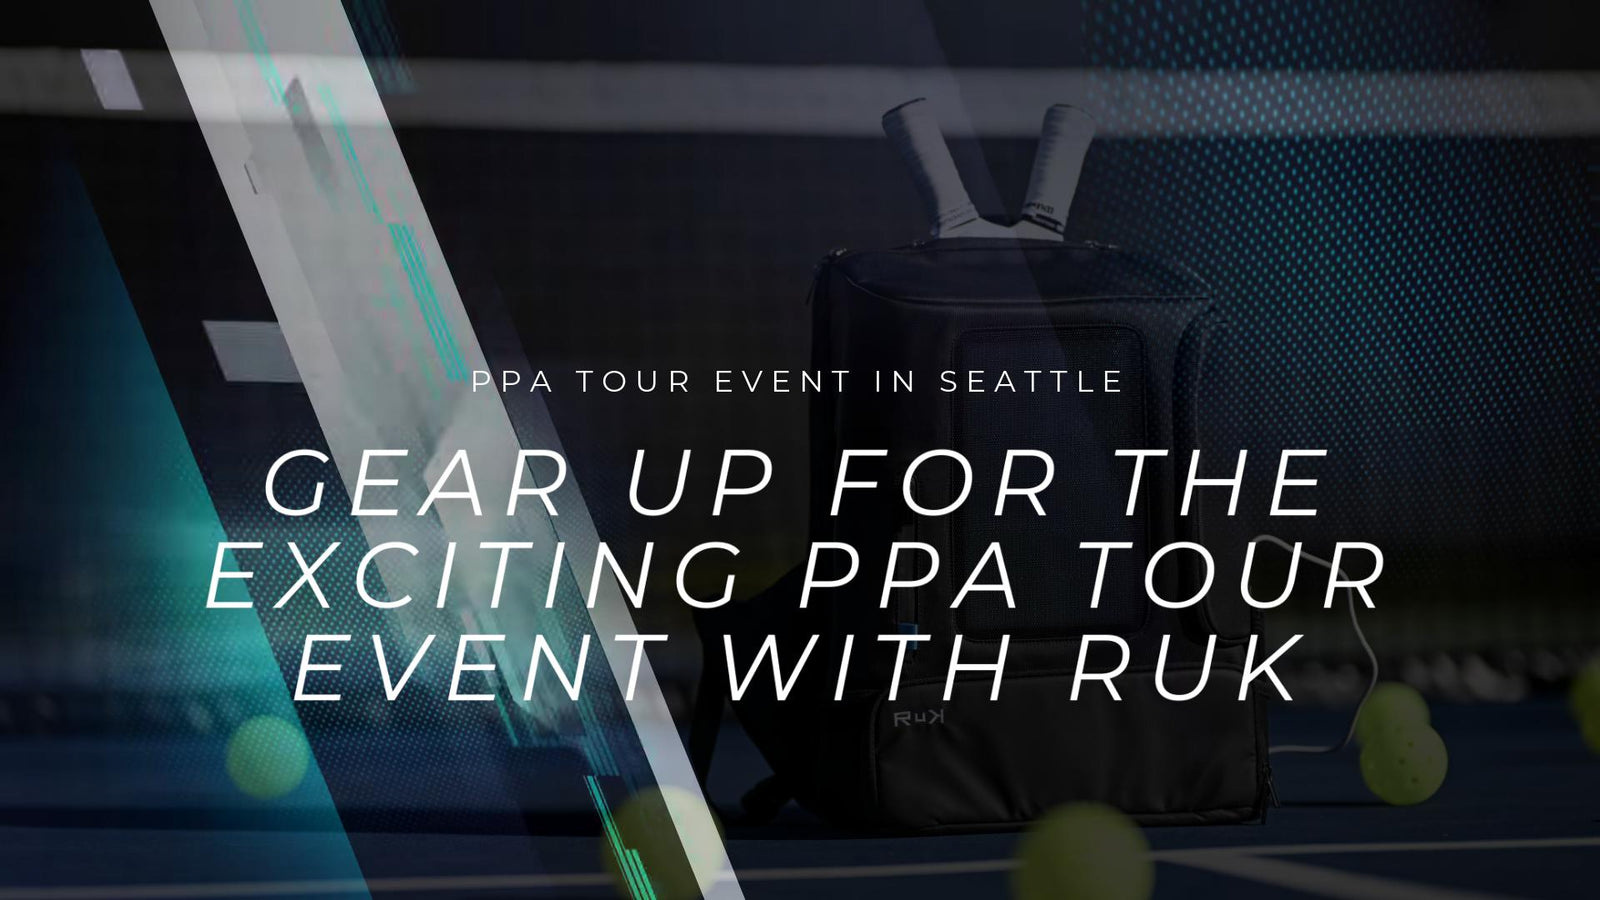 Gear up for the Exciting PPA Tour Event in Seattle with RuK Pack